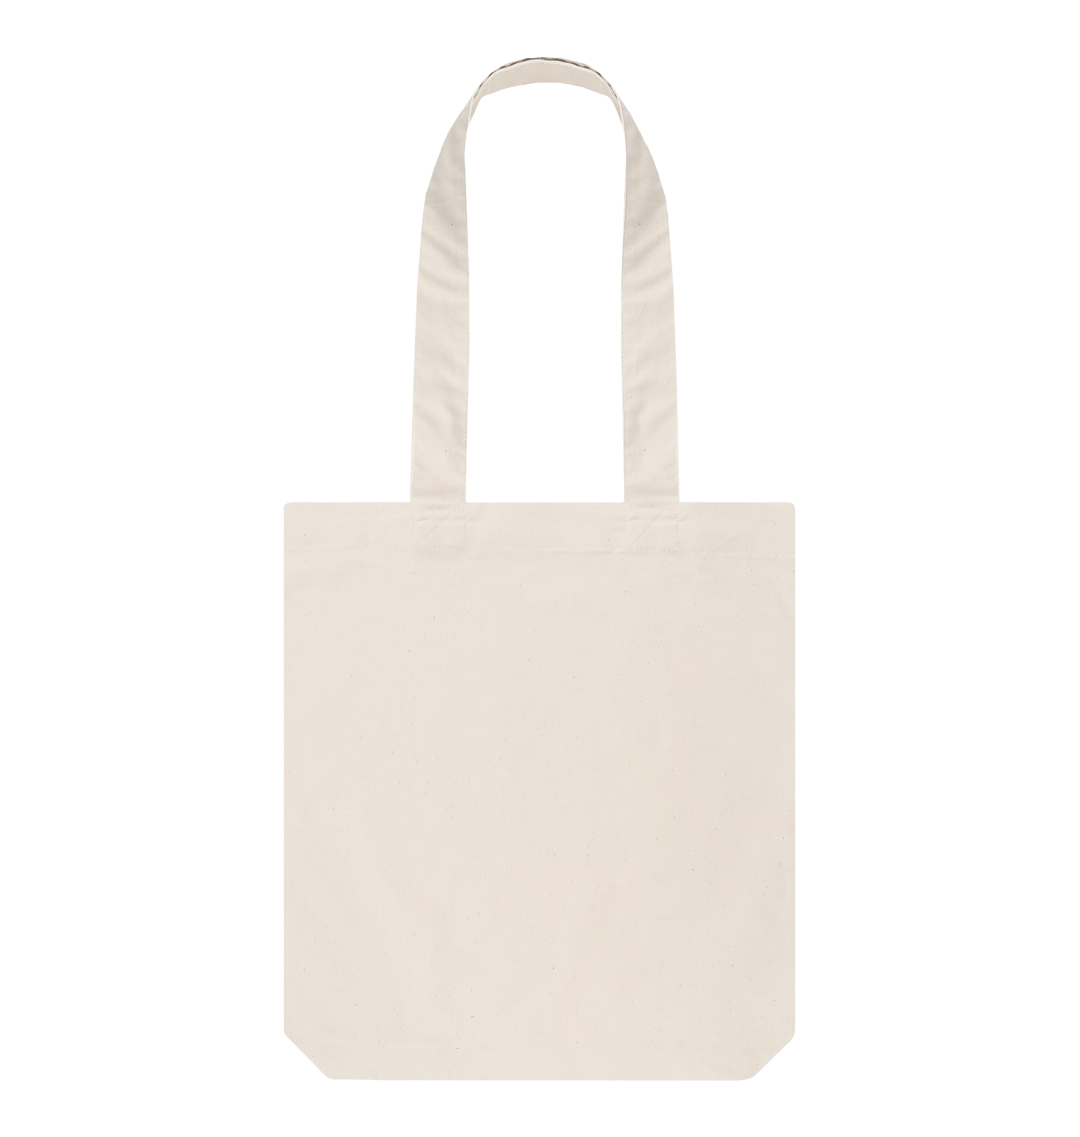 Amazon.com: Set of 6 Blank Cotton Tote Bags Reusable 100% Cotton Reusable Tote  Bags Natural: Home & Kitchen